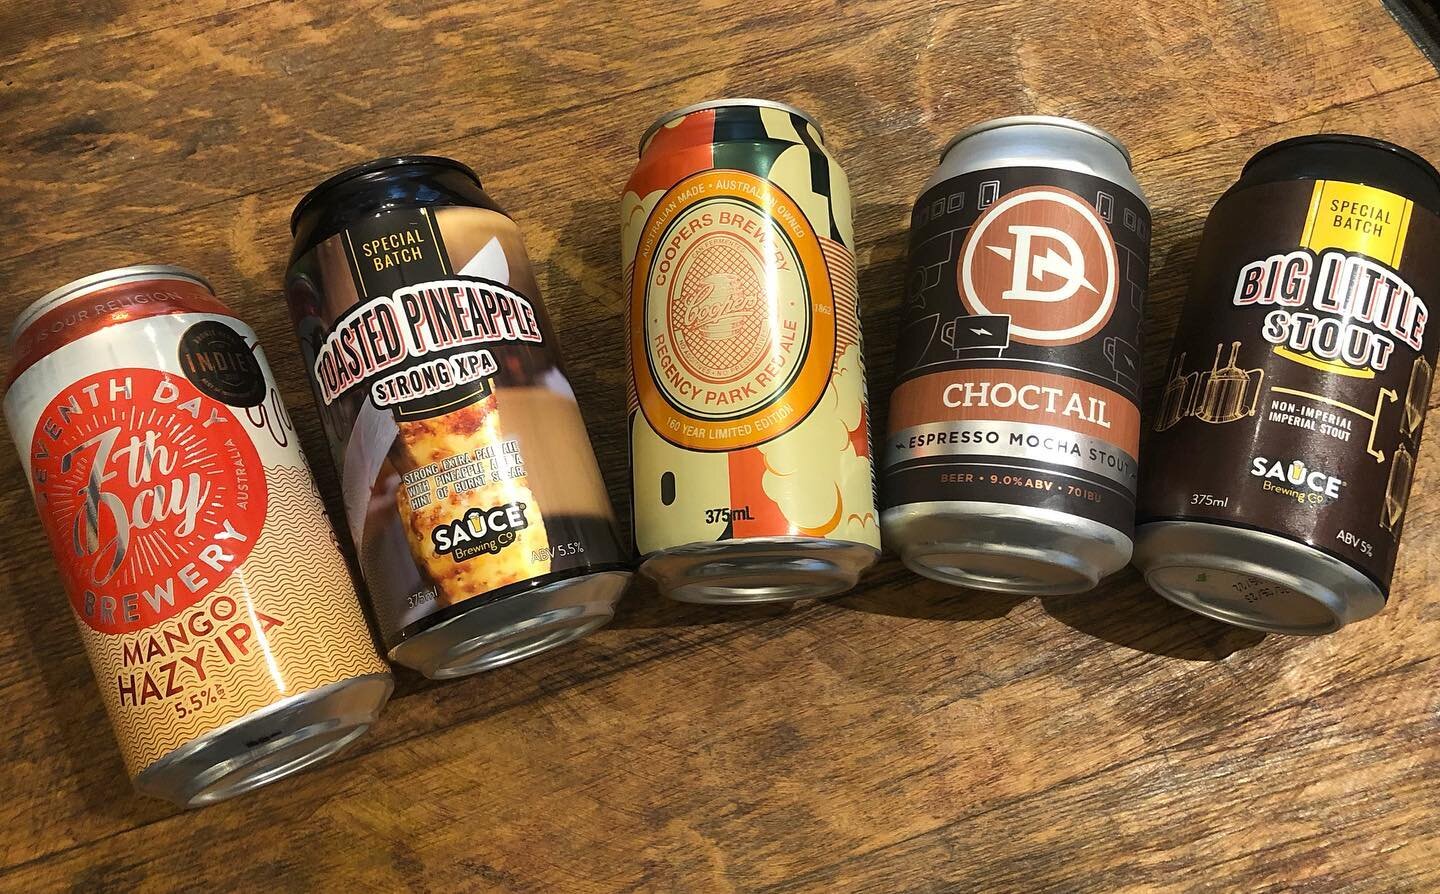 Back to cold and wet 🌧 .. we always have something to cheer you up 🤩. 🍻 Hazy Mango IPA, Toasted Pineapple Strong XPA, Red Ale, Stout and Espresso Mocha Stout 🍻,
NEW @brixdistillers Sydney only craft RUM 🍹, your favourite selection of Plum Wines,